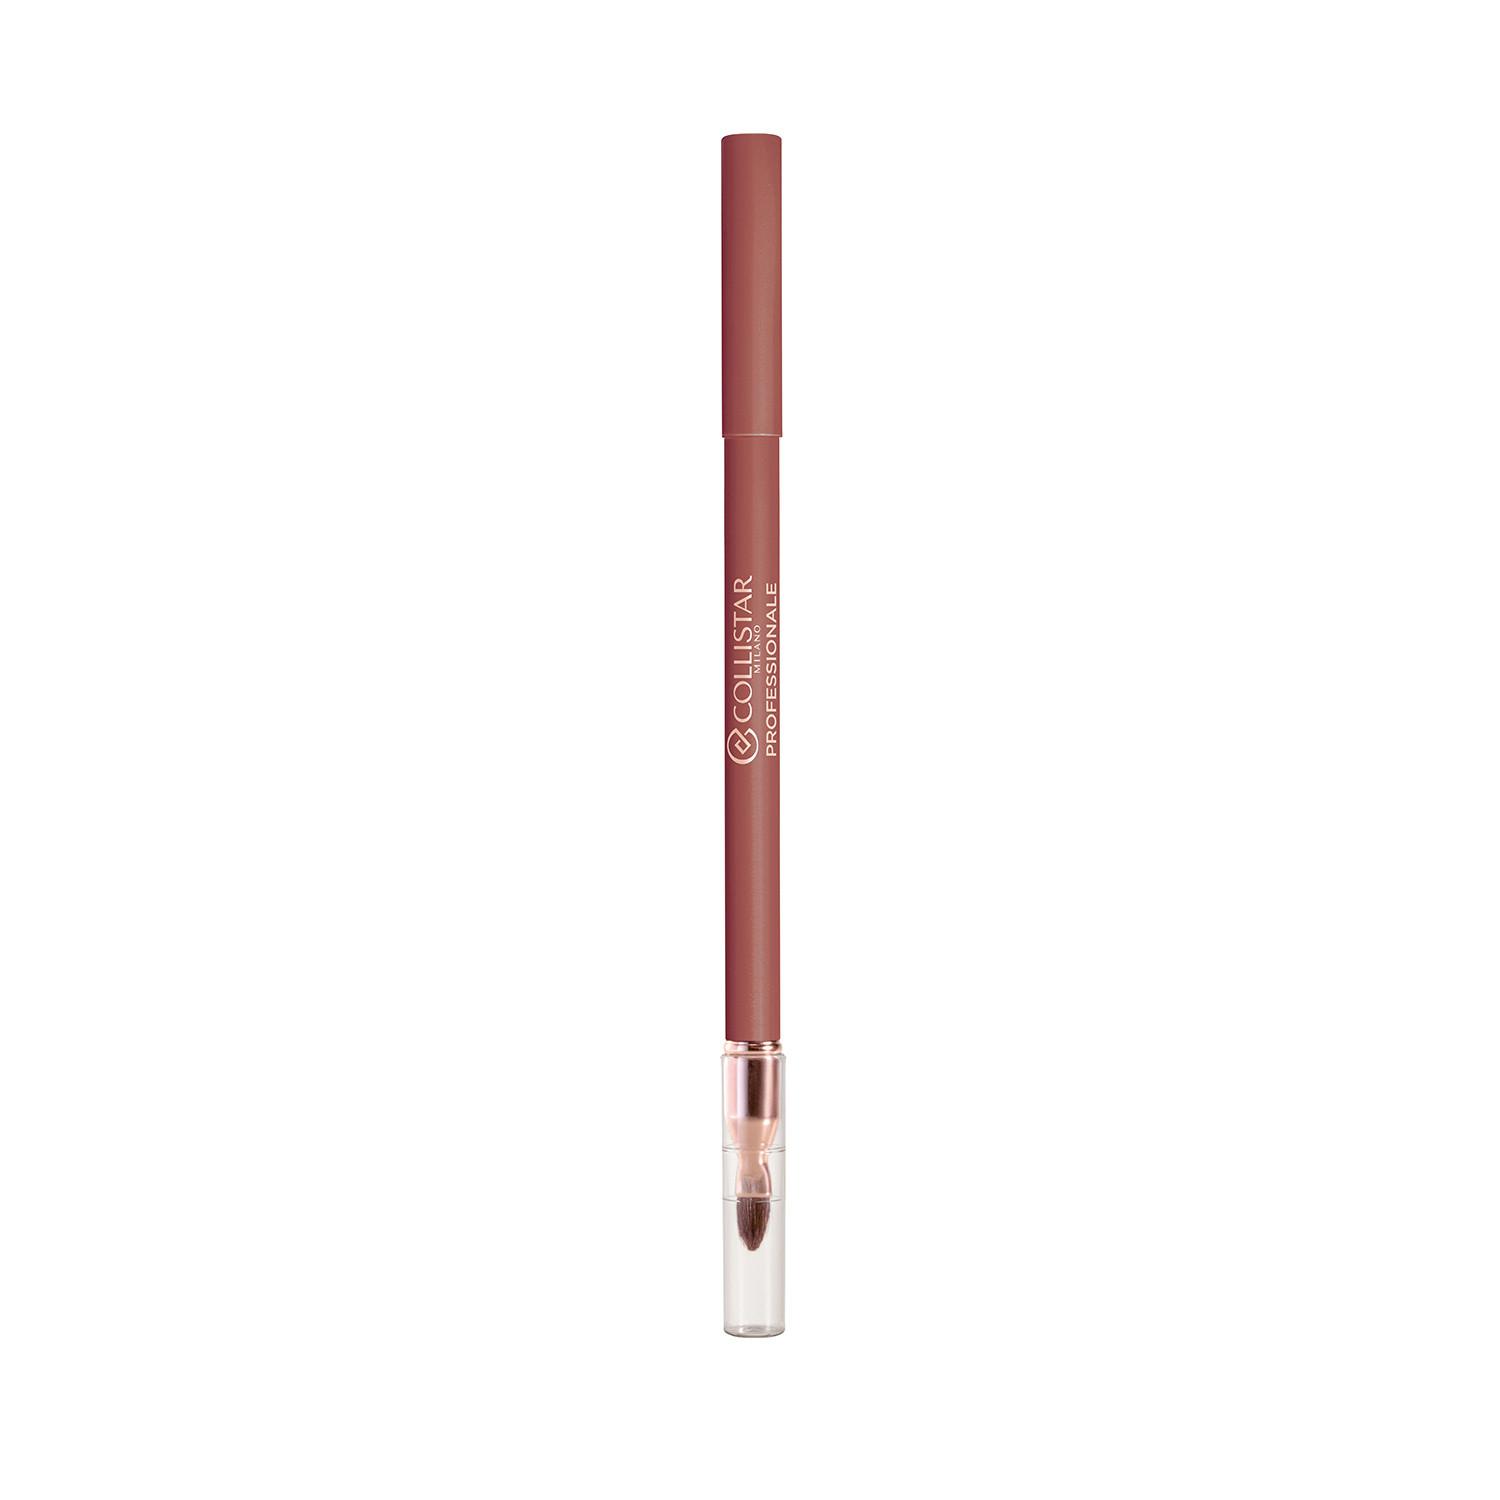 Collistar - Professional long lasting lip pencil - 2 Terracotta, Copper Brown, large image number 0